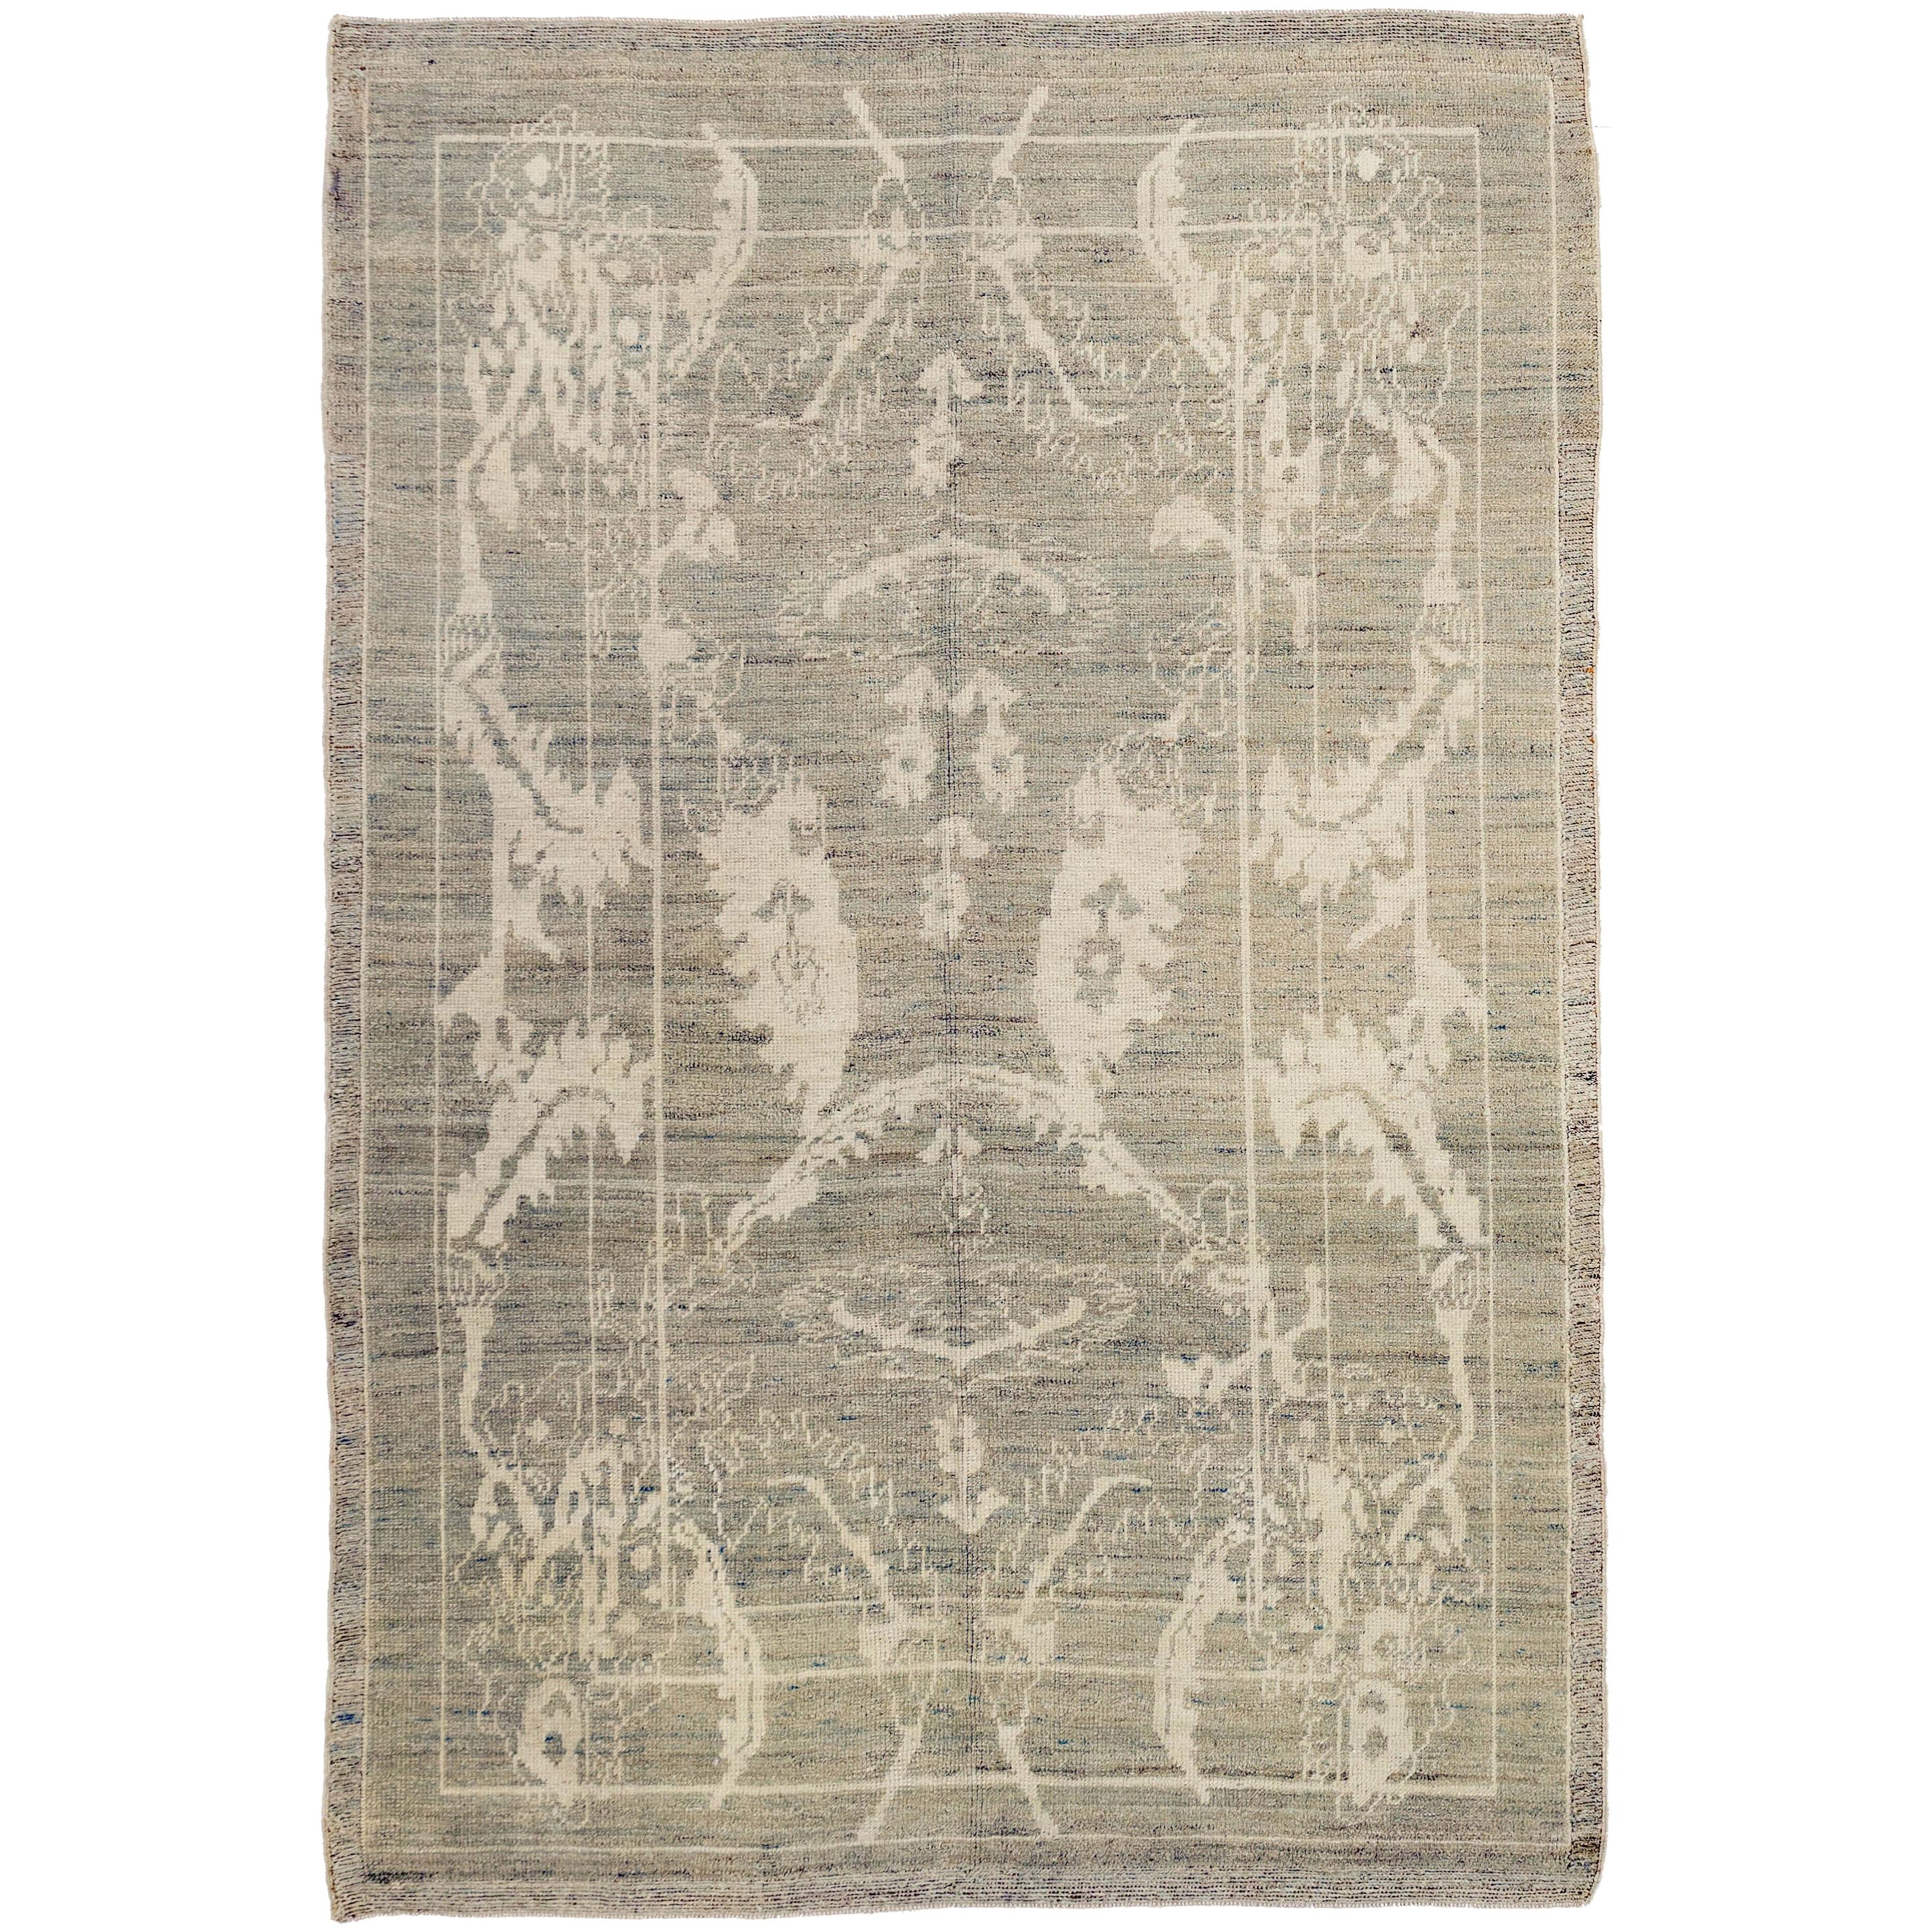 New Turkish Oushak Rug with Ivory and Gray Botanical Details on Beige Field